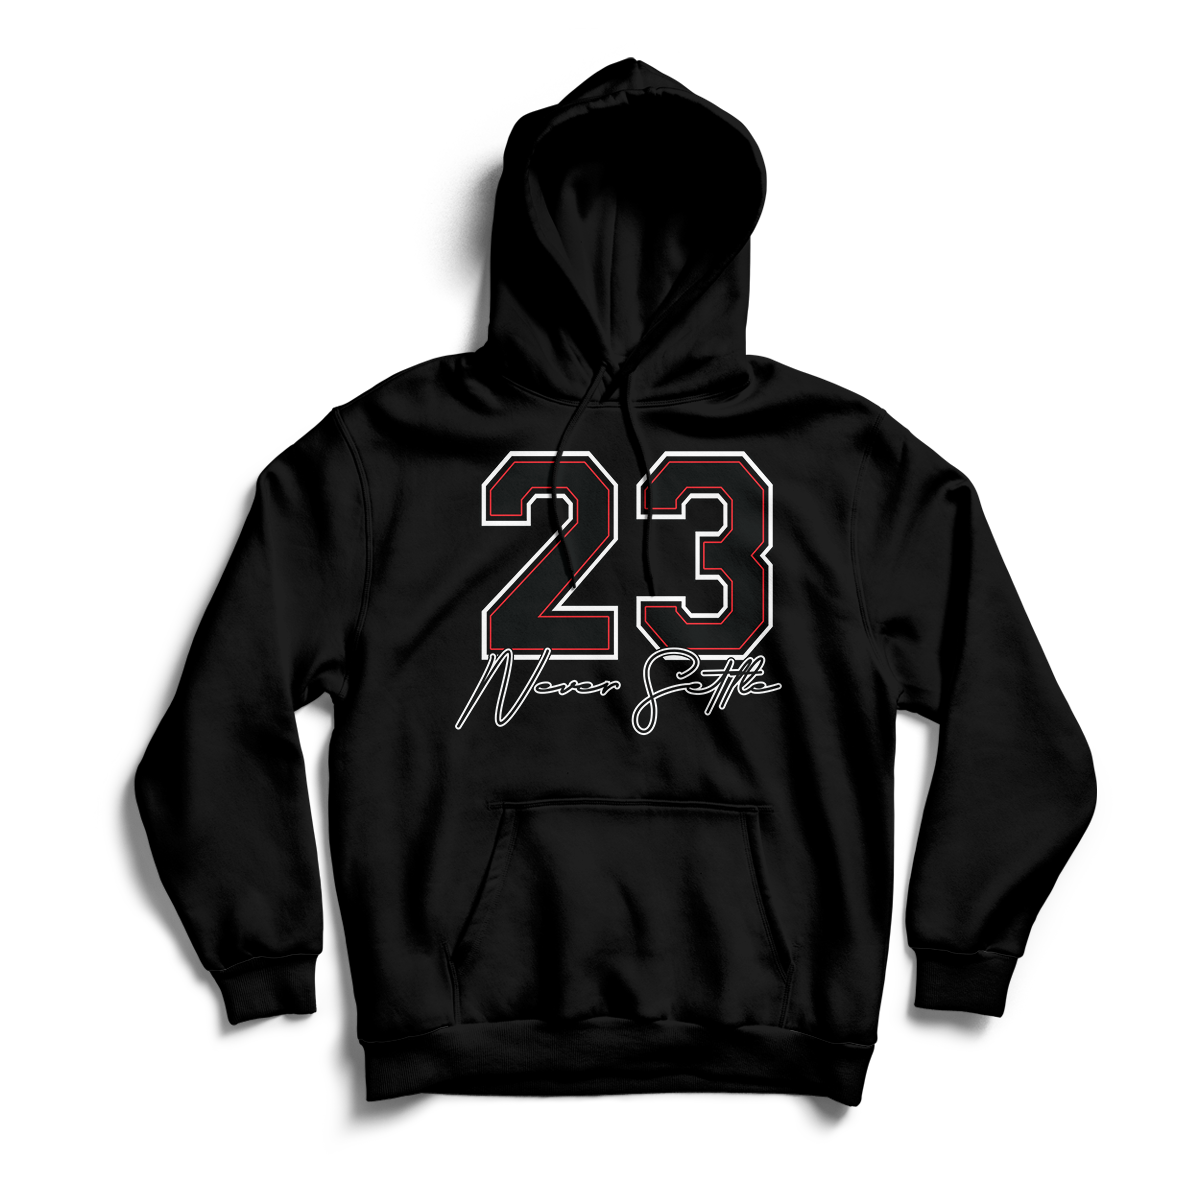 'Never Settle' in Reverse He Got Game CW Unisex Pullover Hoodie